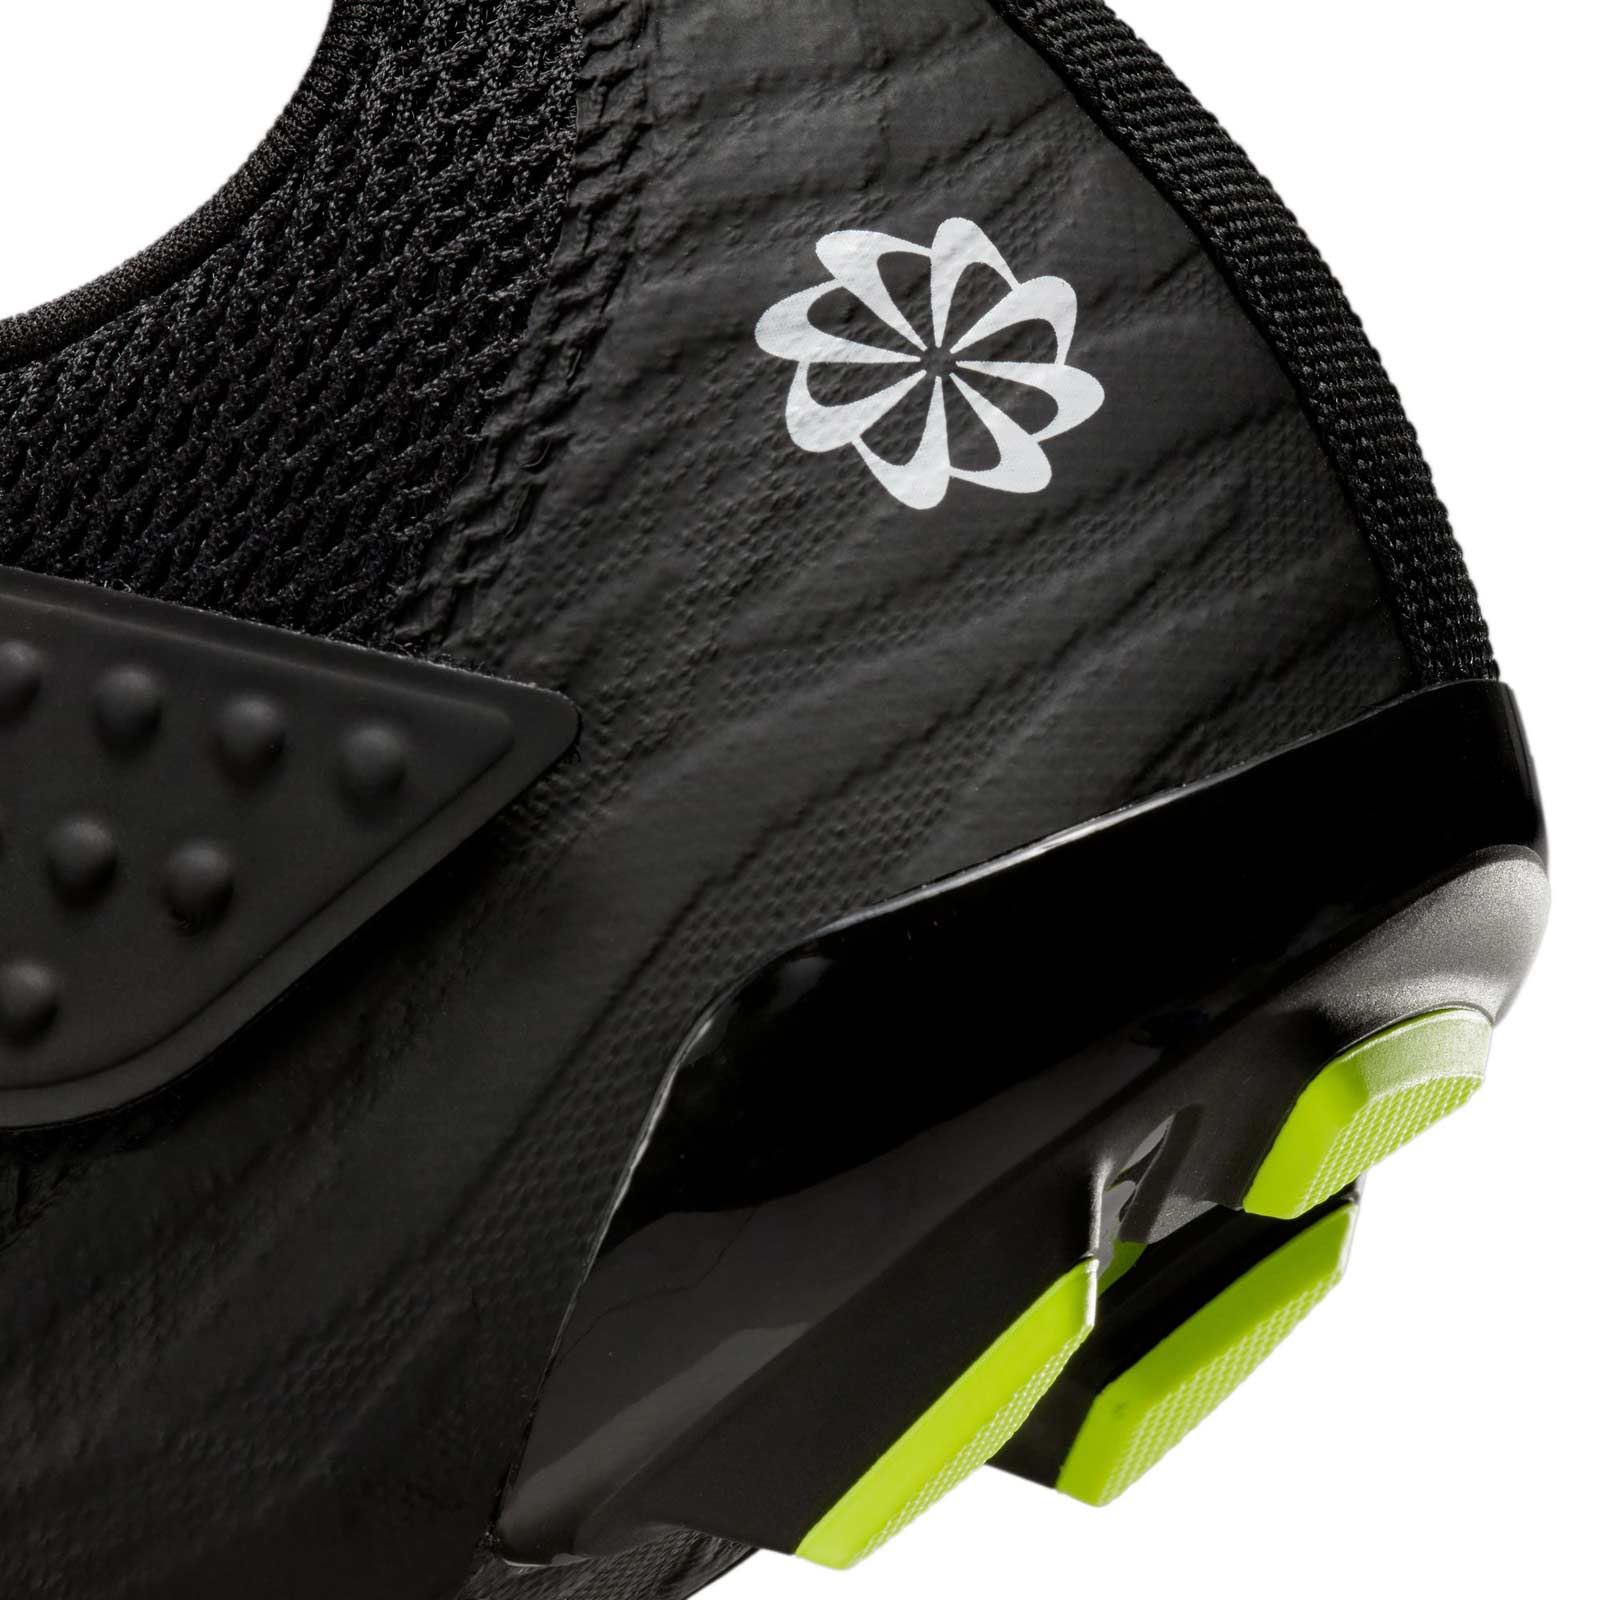 NIKE SUPERREP CYCLE 2 NEXT NATURE INDOOR CYCLING SHOES